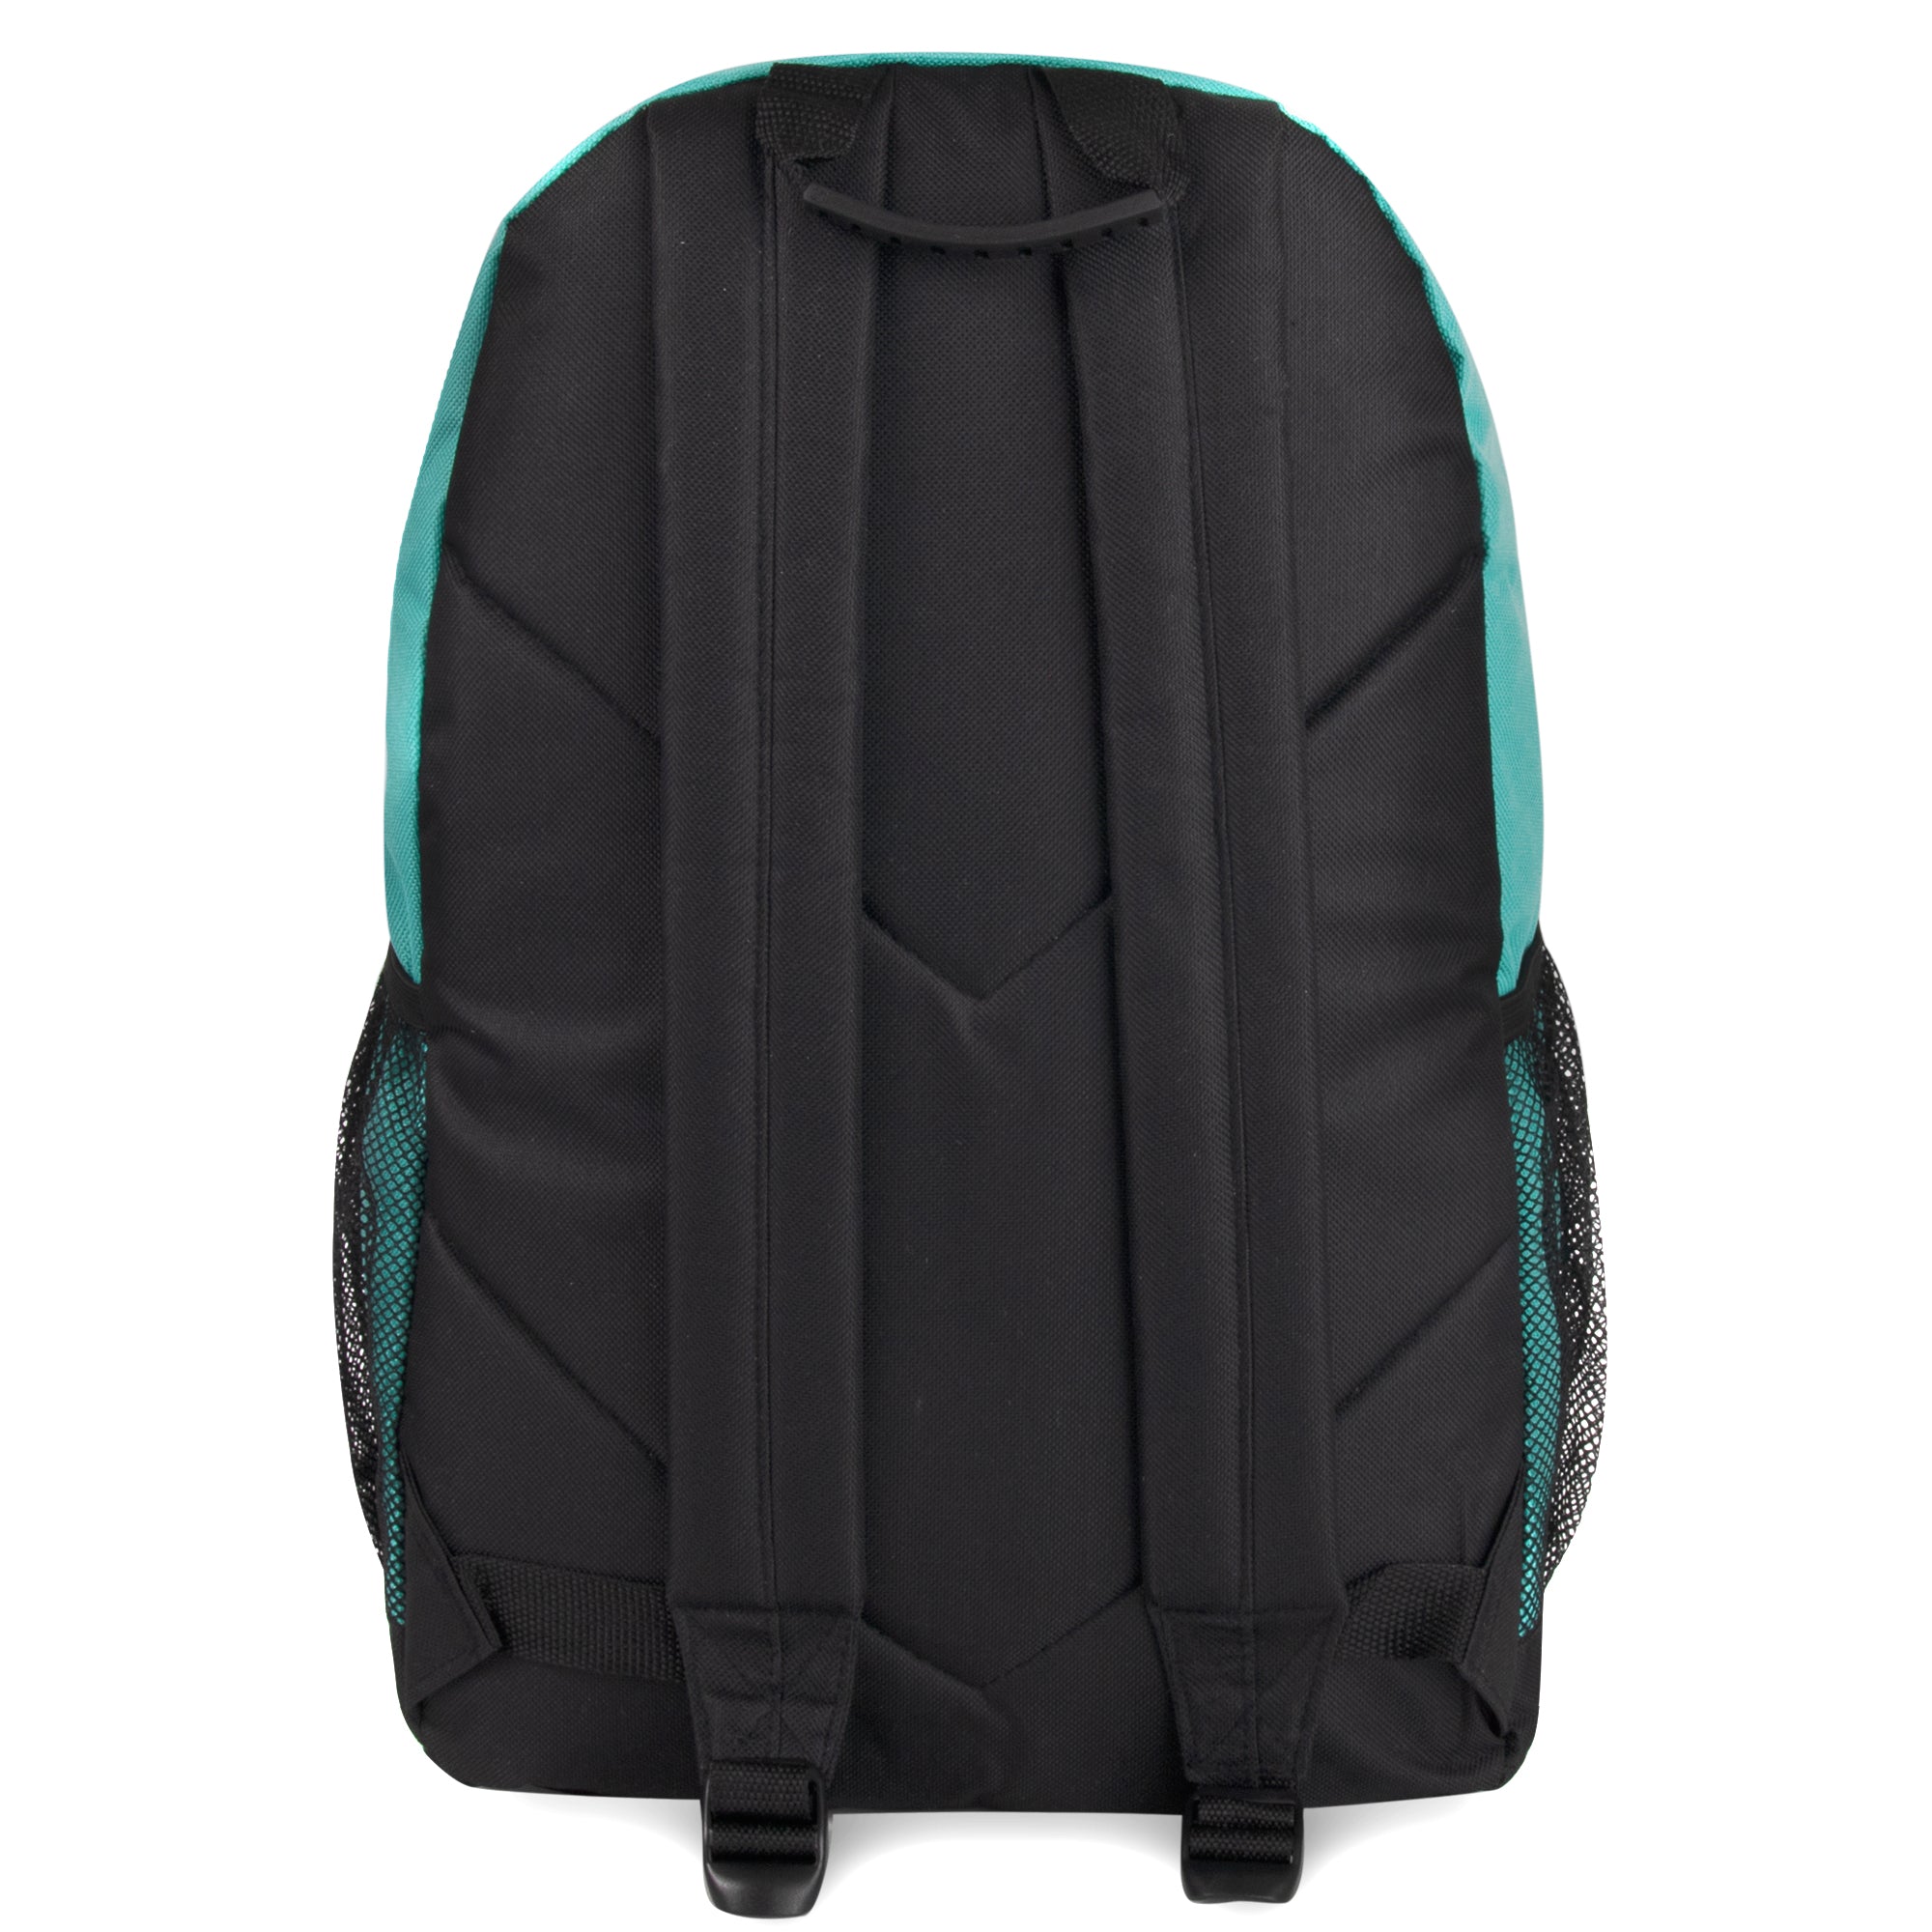 Wholesale 18-Inch Multi-Pocket Reflective Backpack -  3 Colors